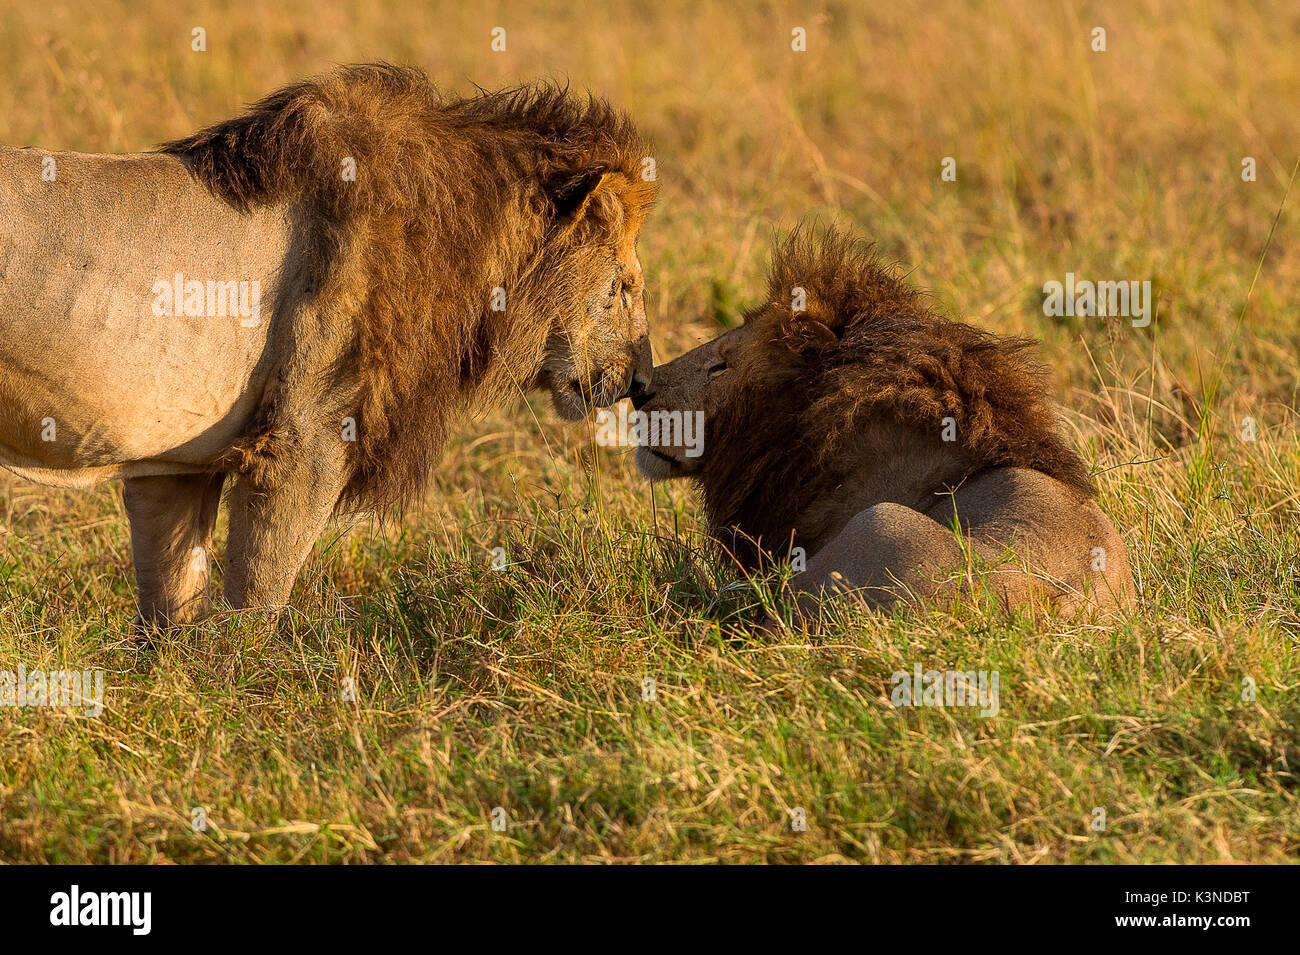 Masai Mara Park,Kenya,Africa  A pair of male lions, about 8 years old, taken in the Masai Mara Stock Photo